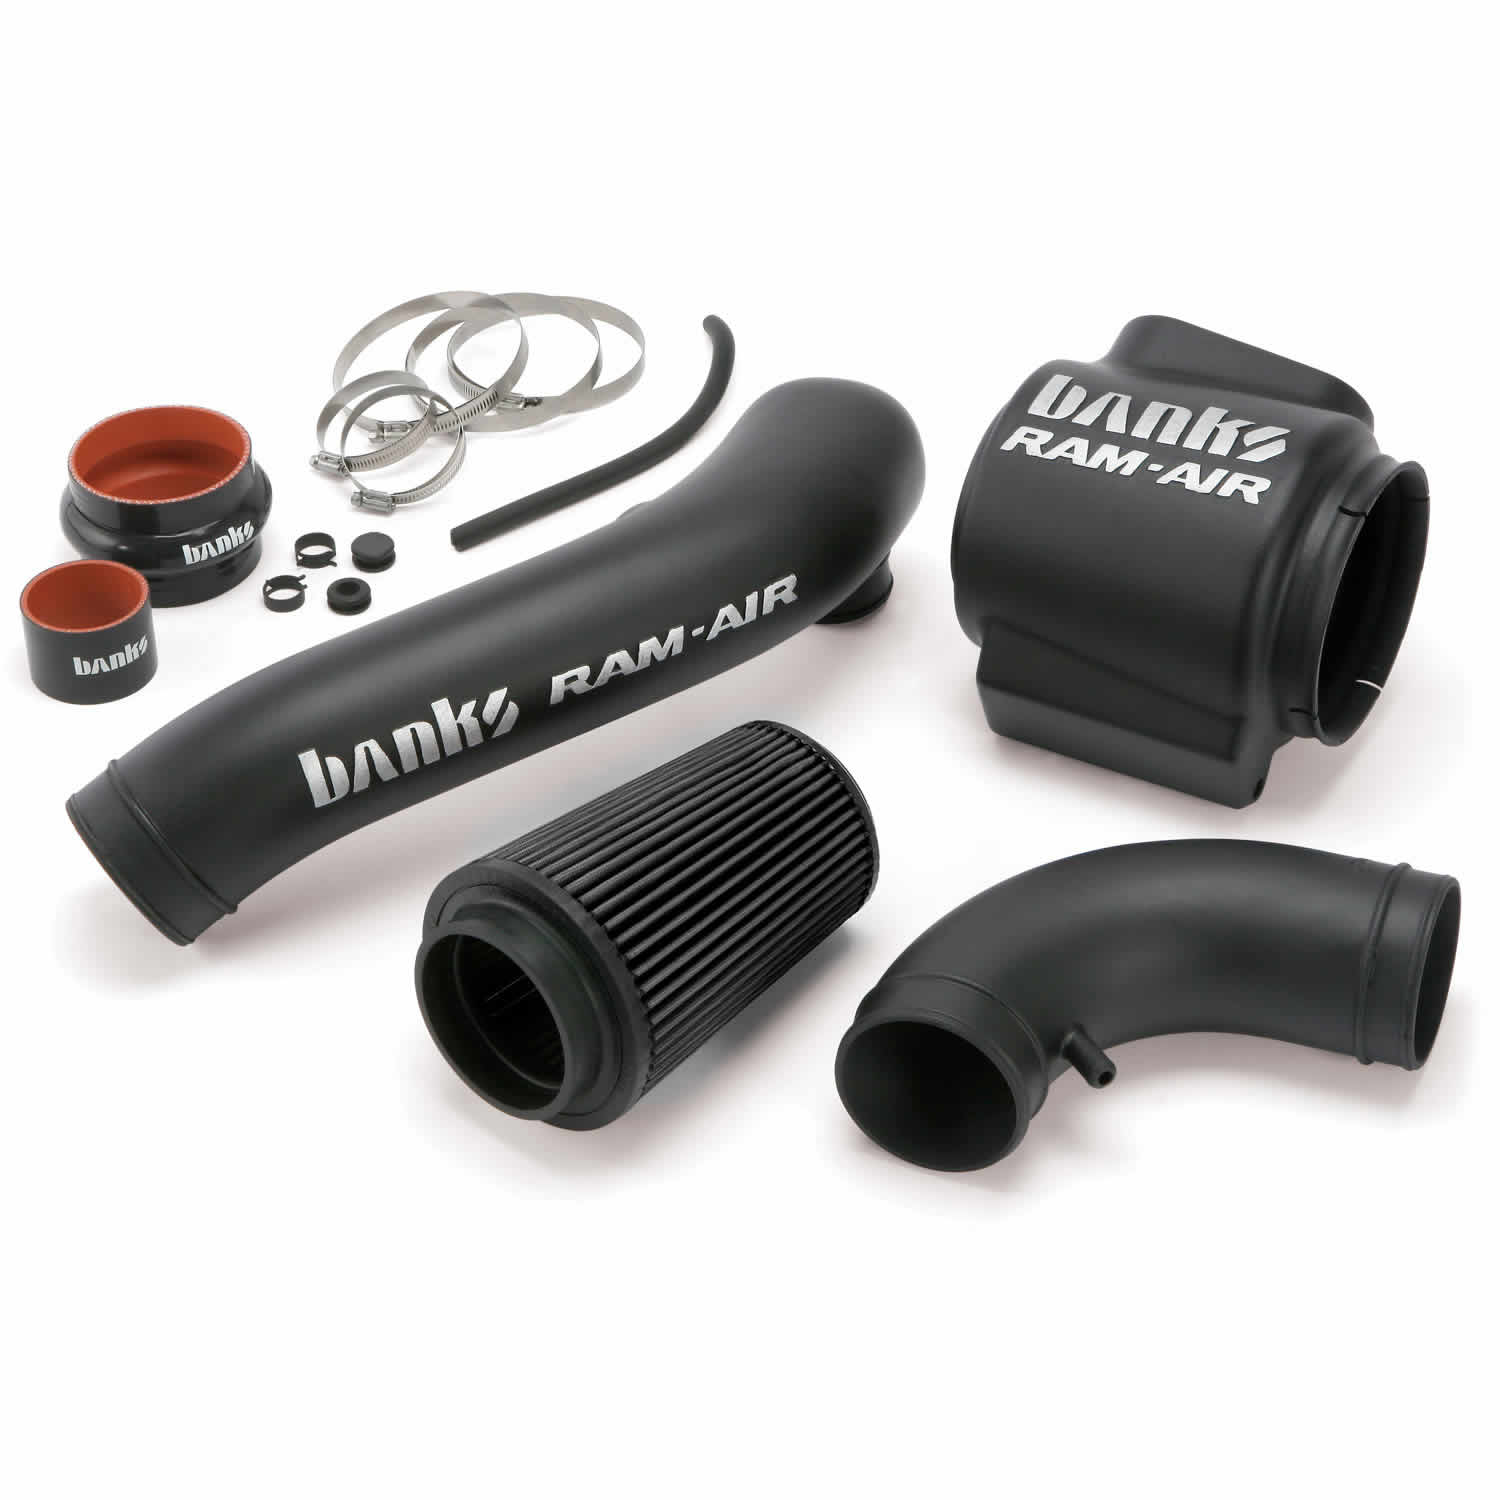 Ram-Air Intake System Dry Filter for 1997-2006 Jeep Wrangler 4.0L